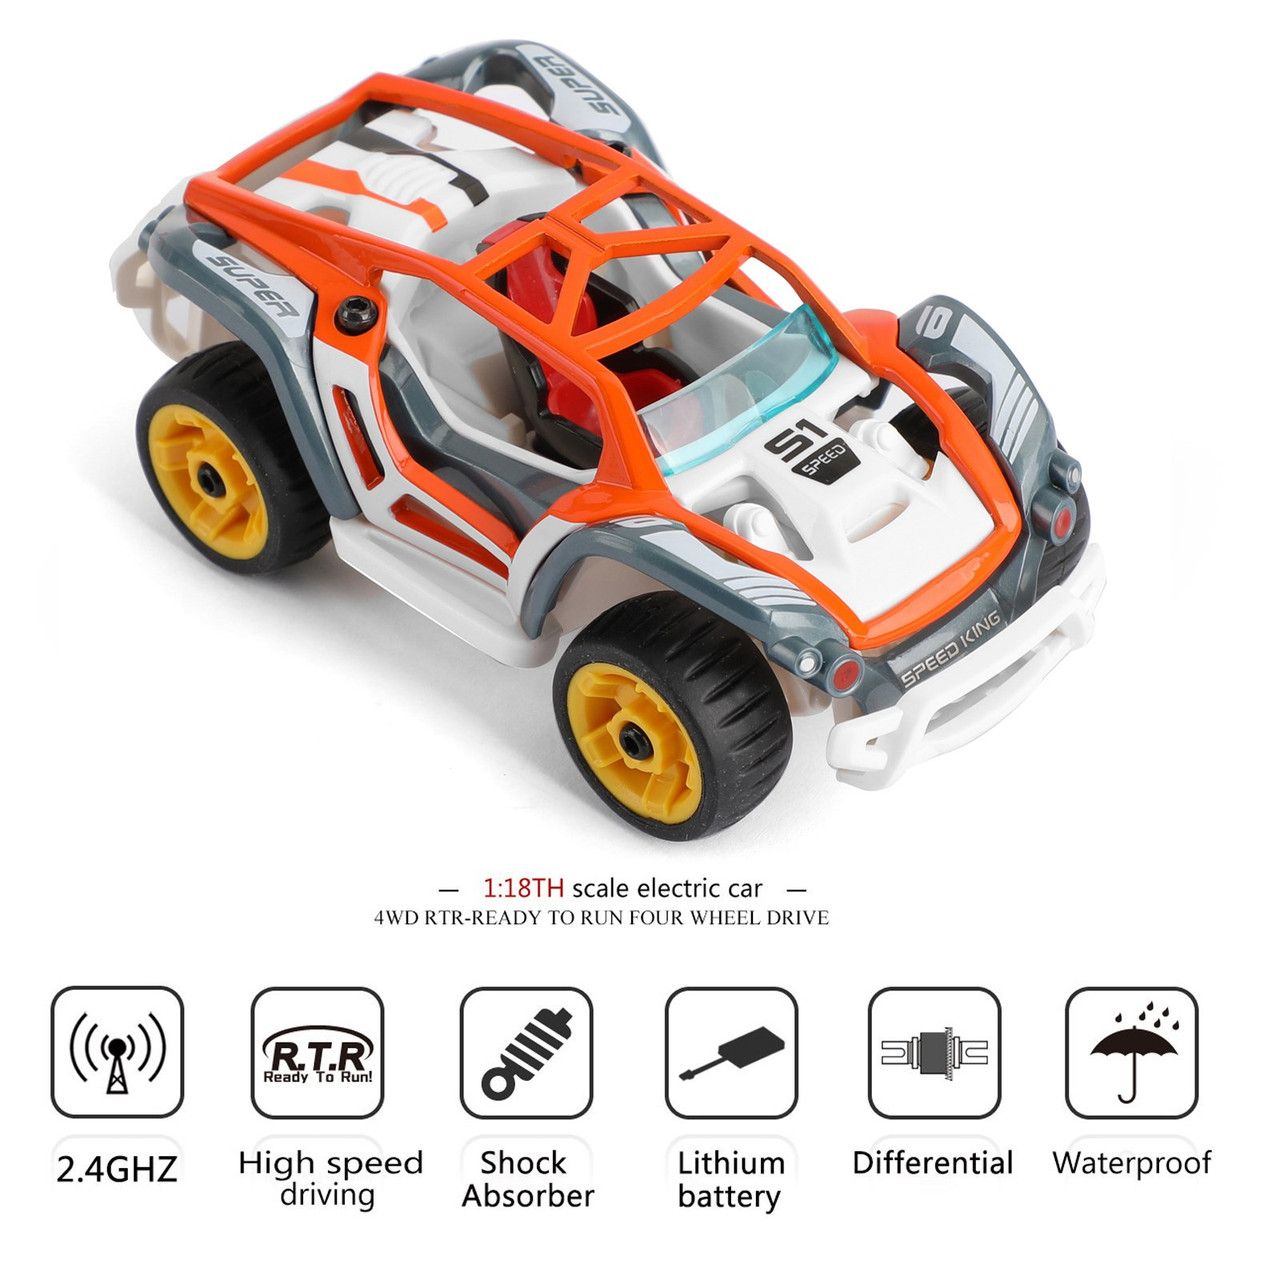 3PCS Build Your Car Kit Toy Set Toy Car Make Your Own Car Toy